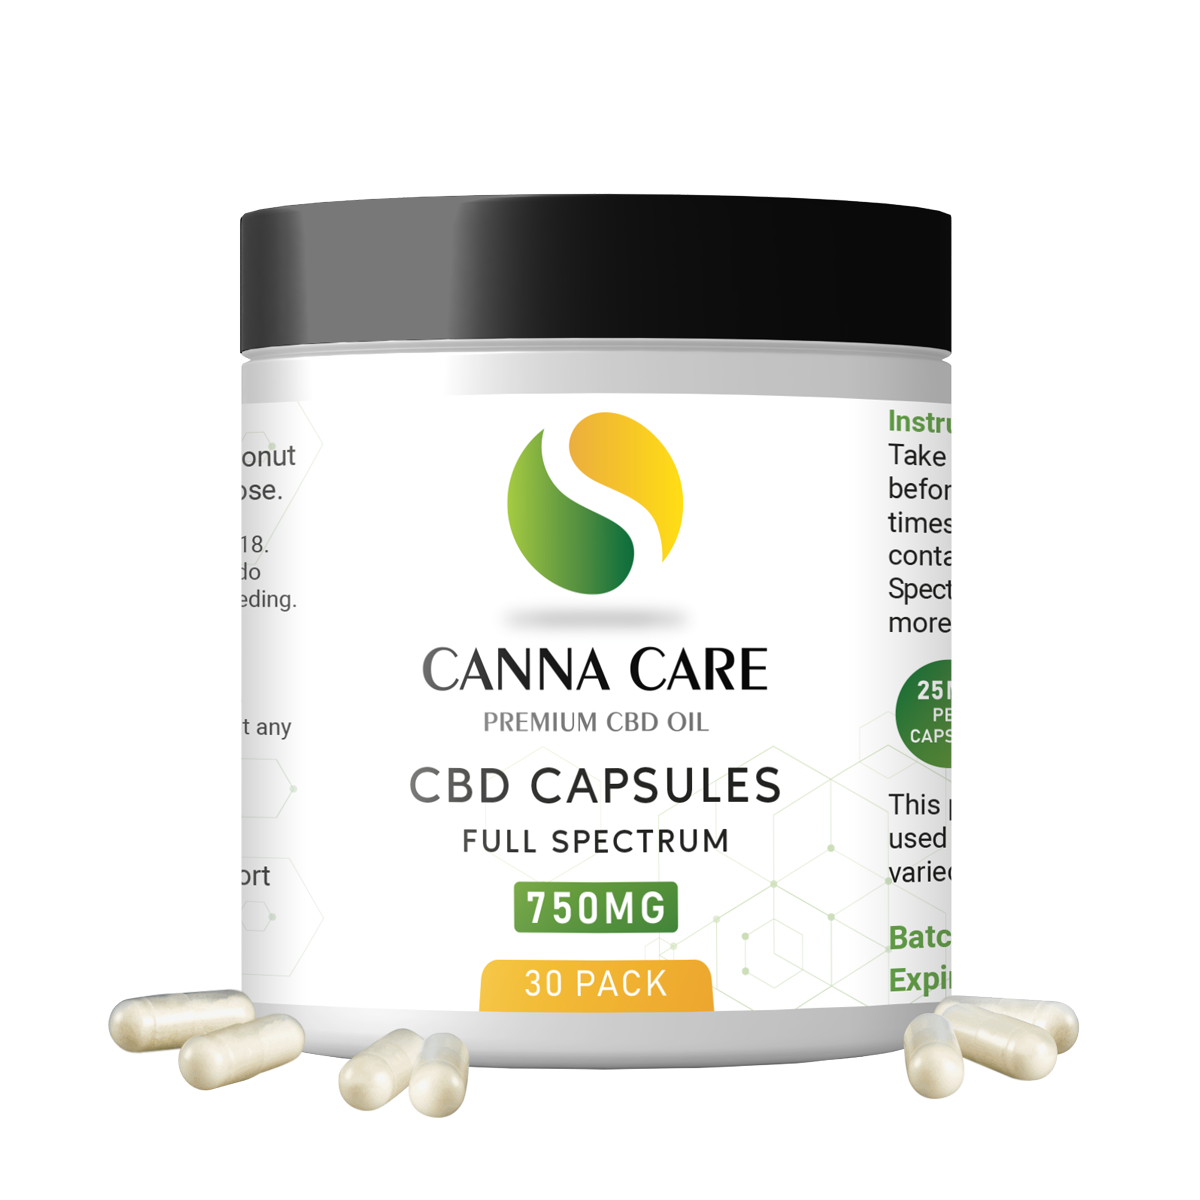 https://cannacare.gi/wp-content/uploads/2021/07/Capsules.png